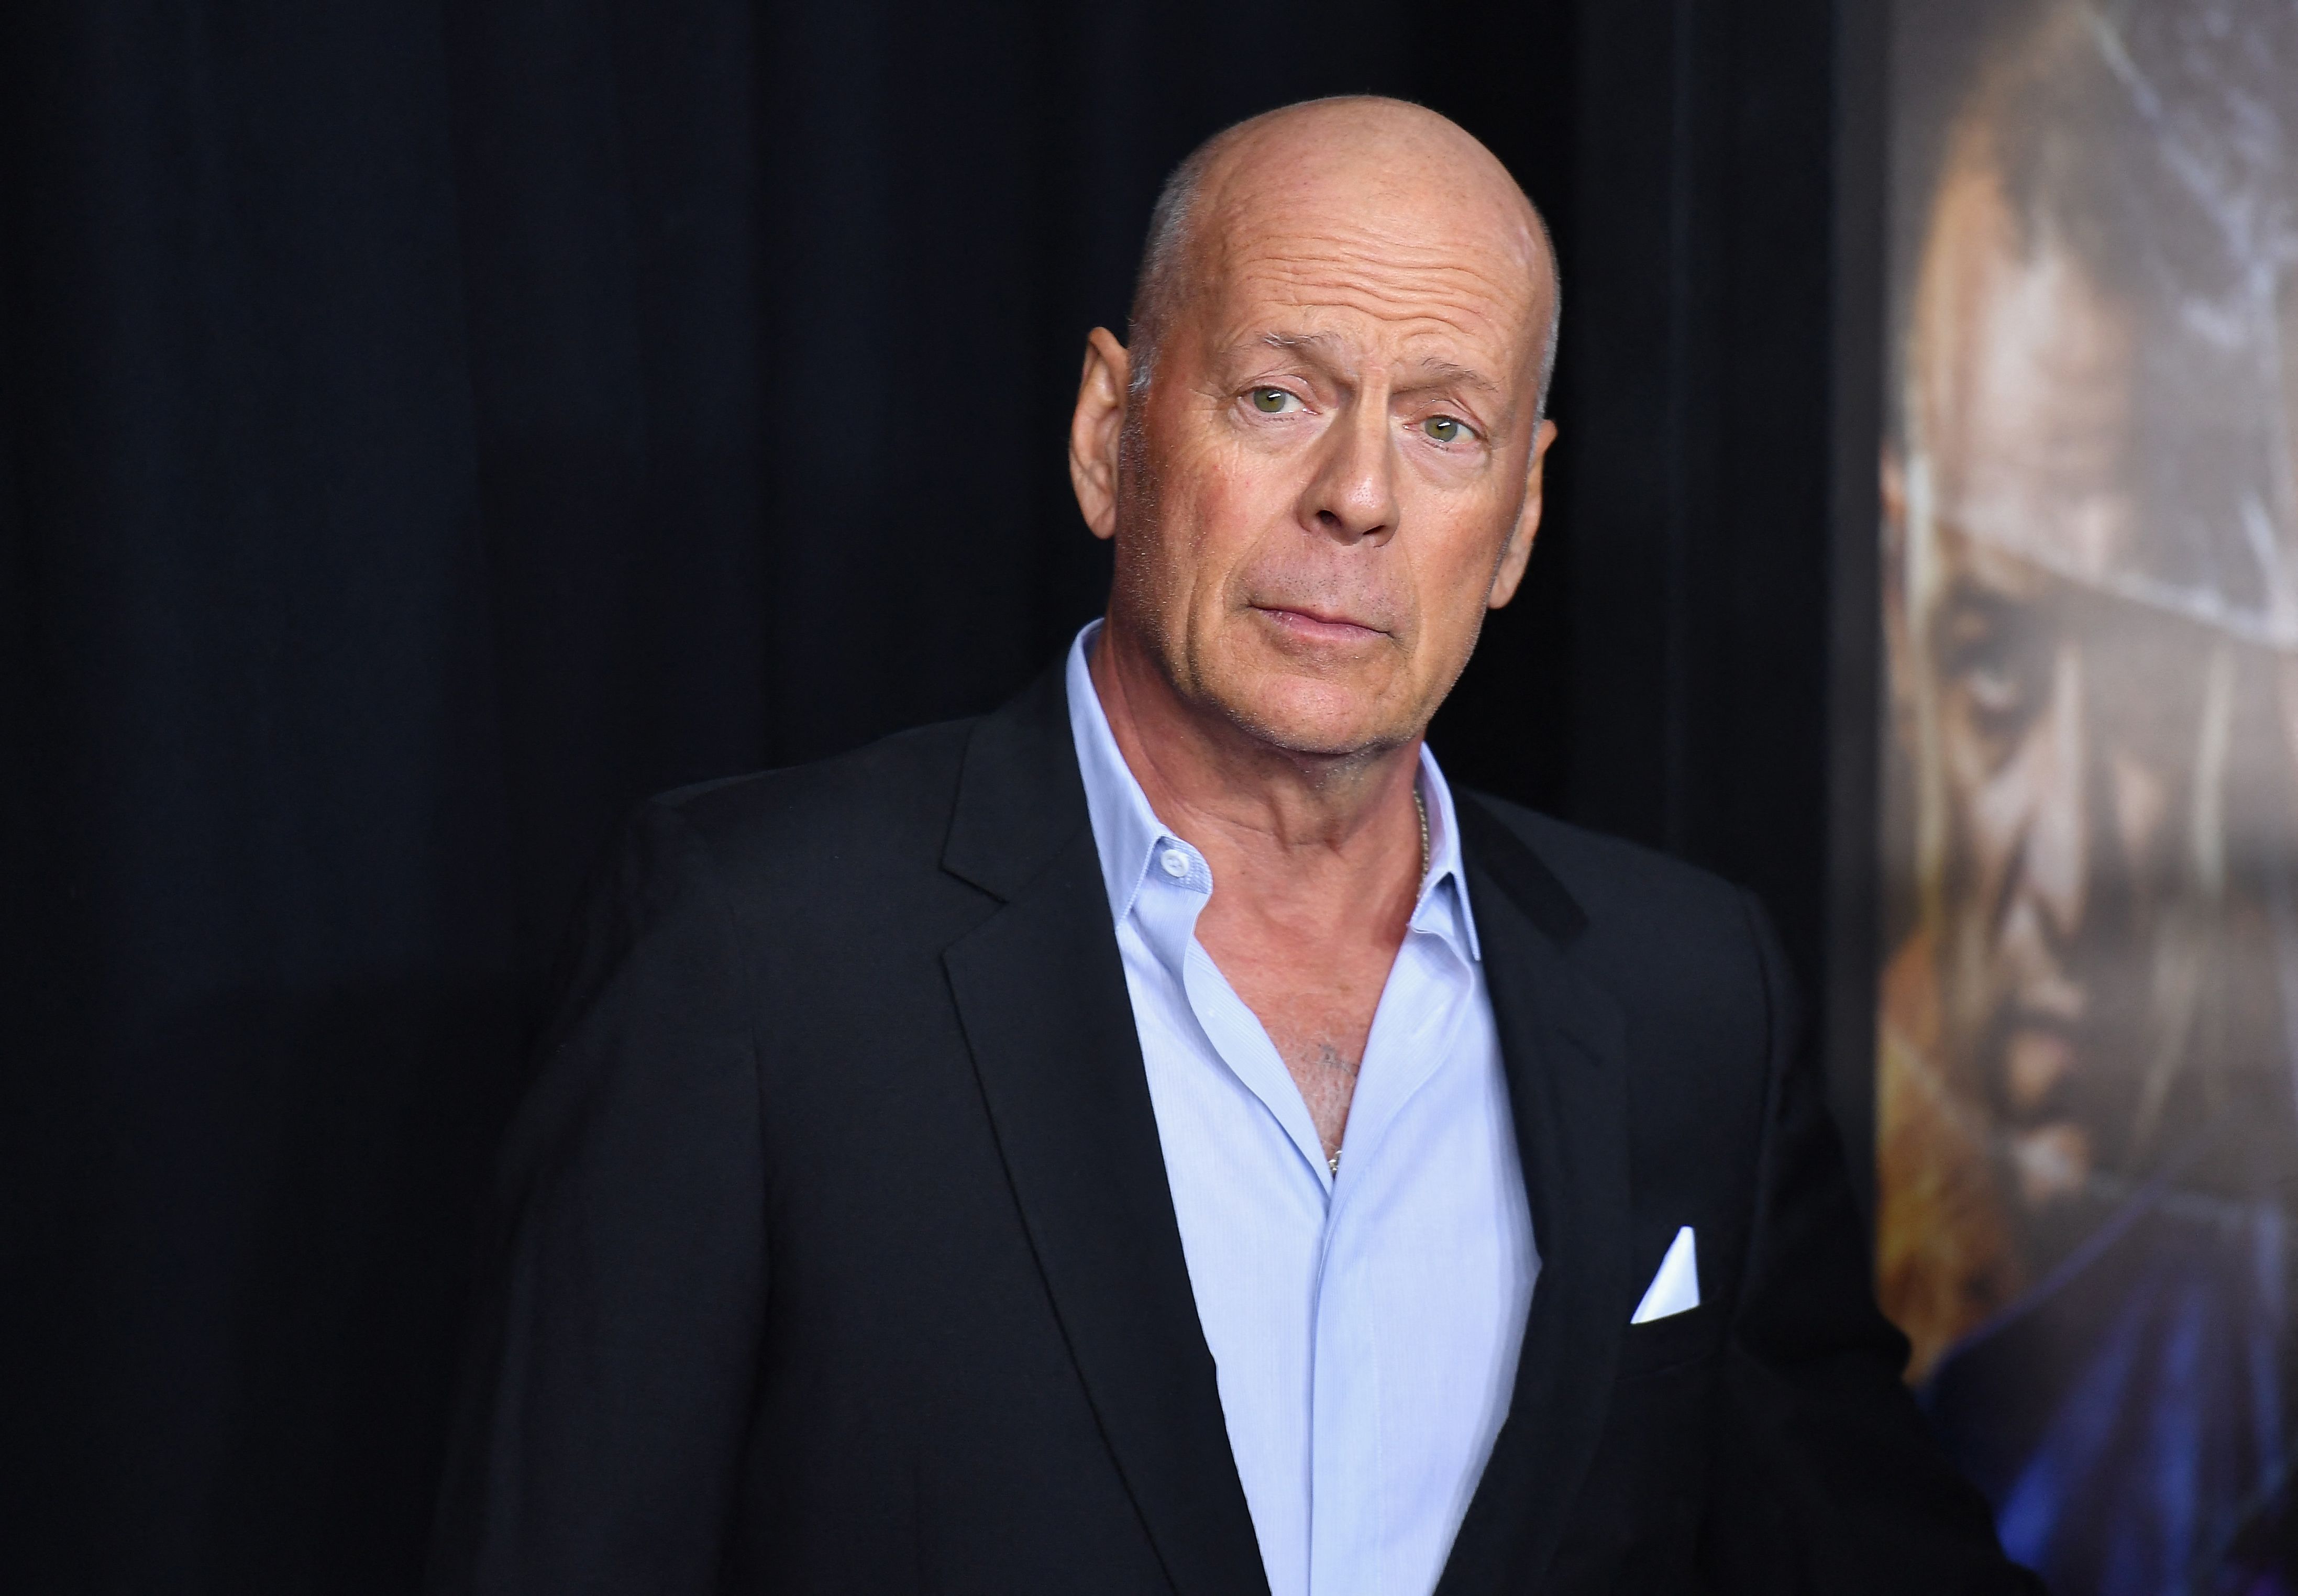 Bruce Willis attends the premiere of Universal Pictures' "Glass" at SVA Theater on January 15, 2019, in New York City. | Source: Getty Images